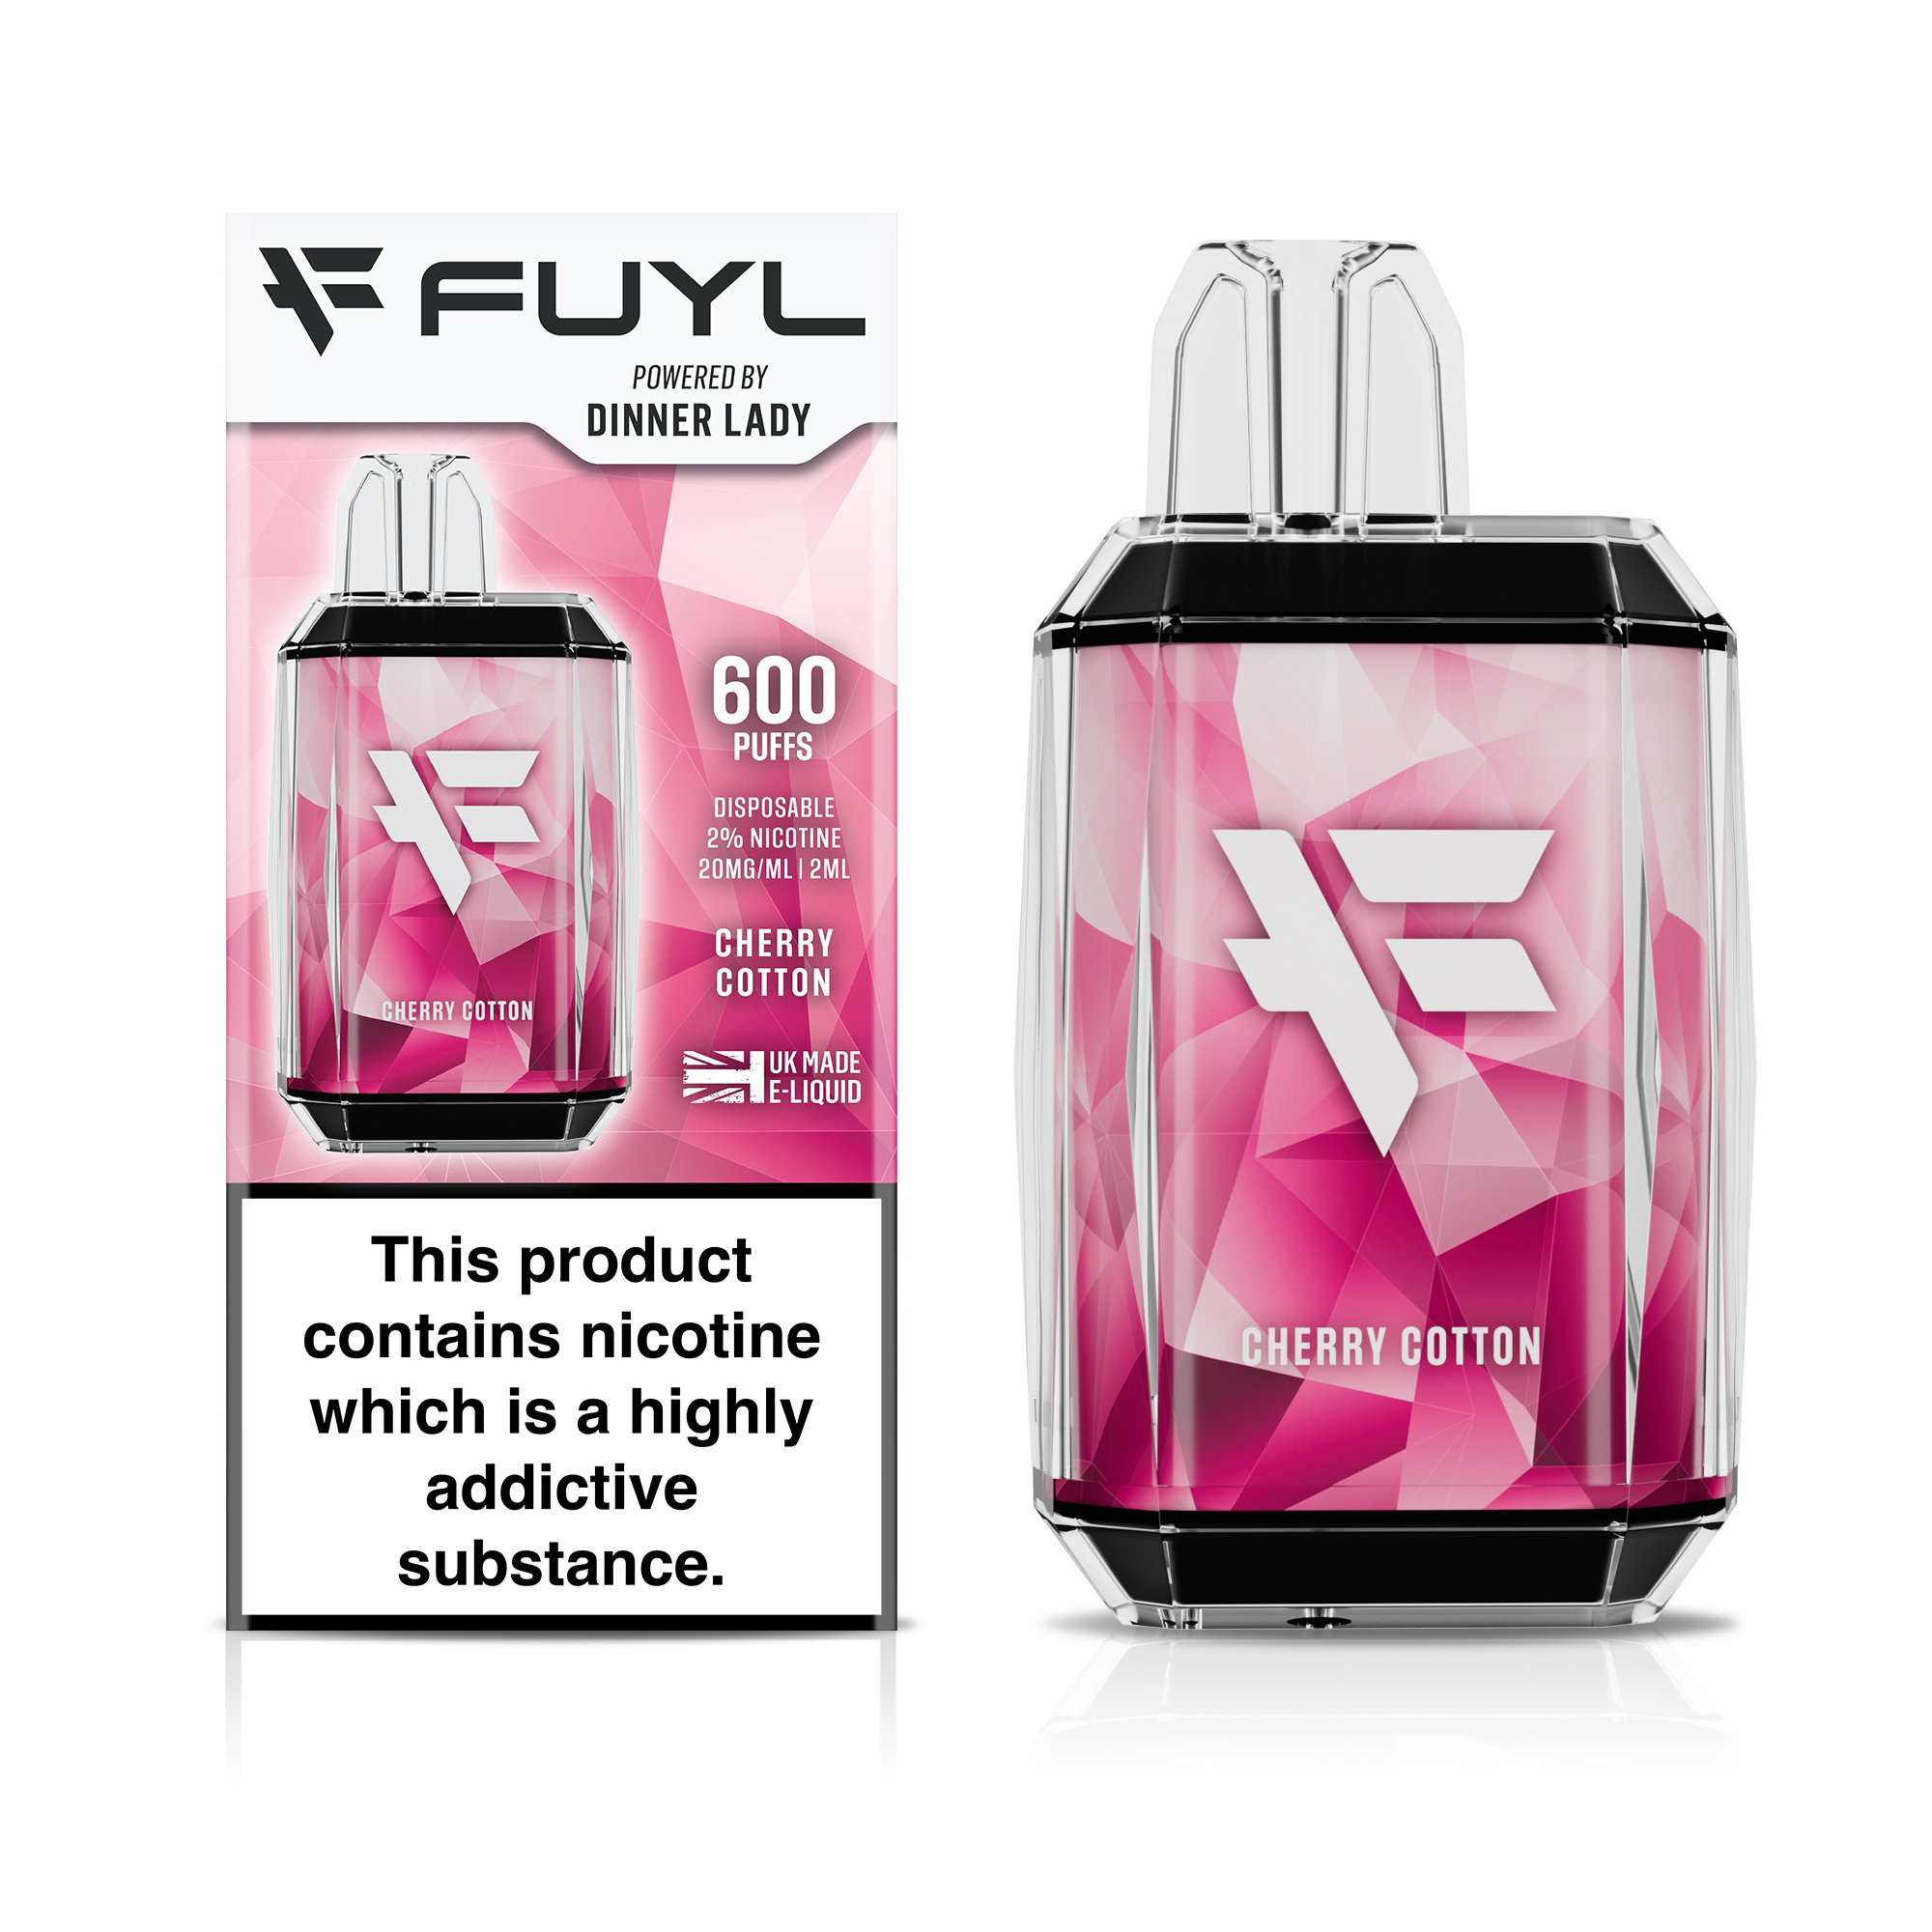 Cherry Cotton by Fuyl Dinner Lady 600puff Disposable